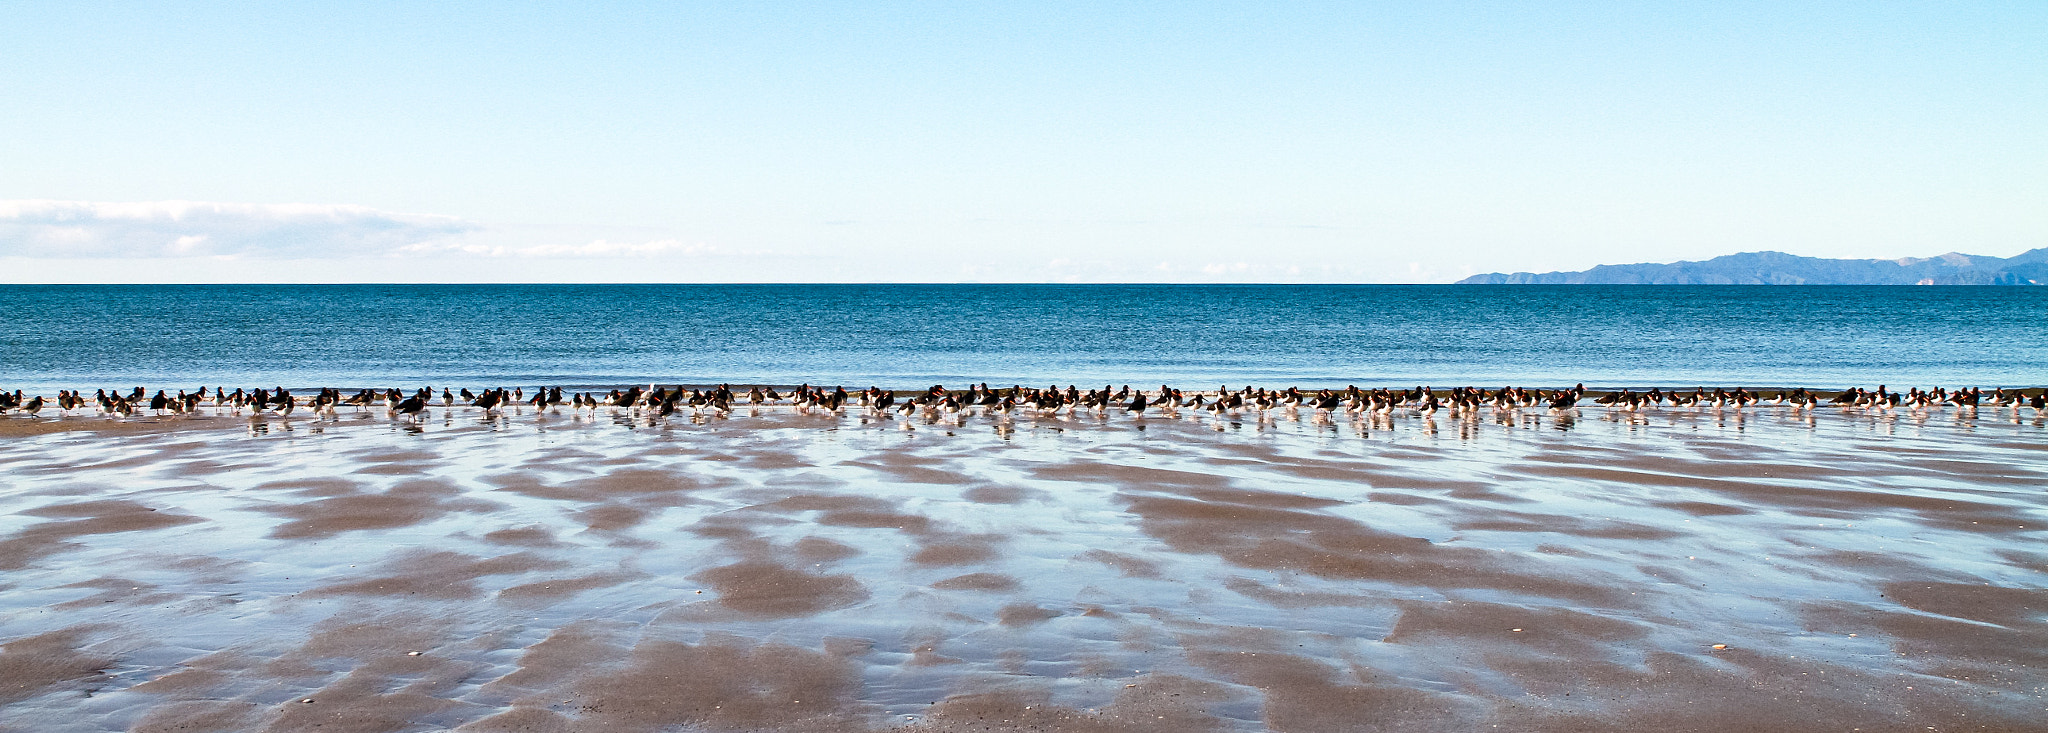 Canon 24-70mm sample photo. Oyster catchers lined up along the shore near collingwood, golden bay, nelson, new zealand. photography